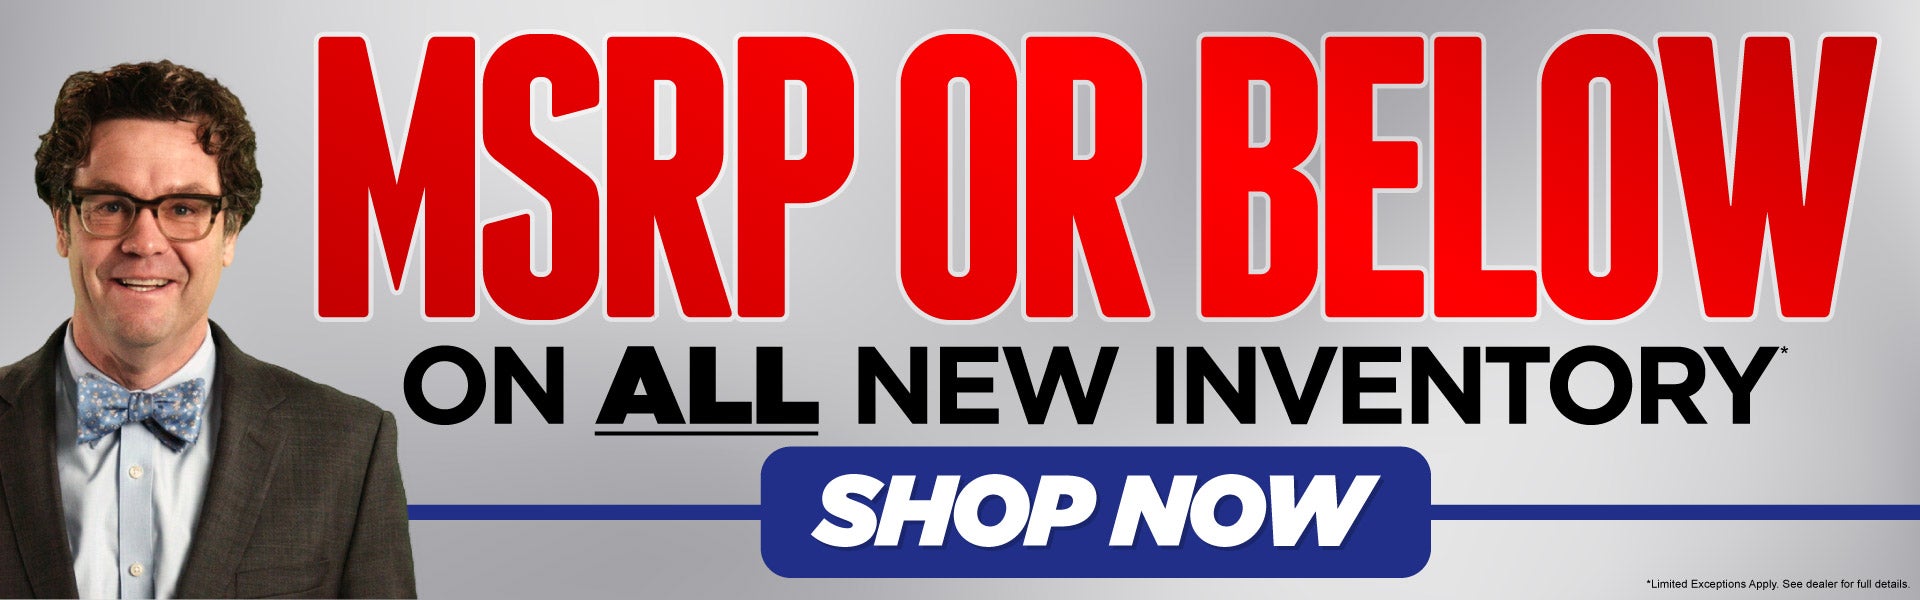 MSRP or Below on ALL New Inventory – Shop Now